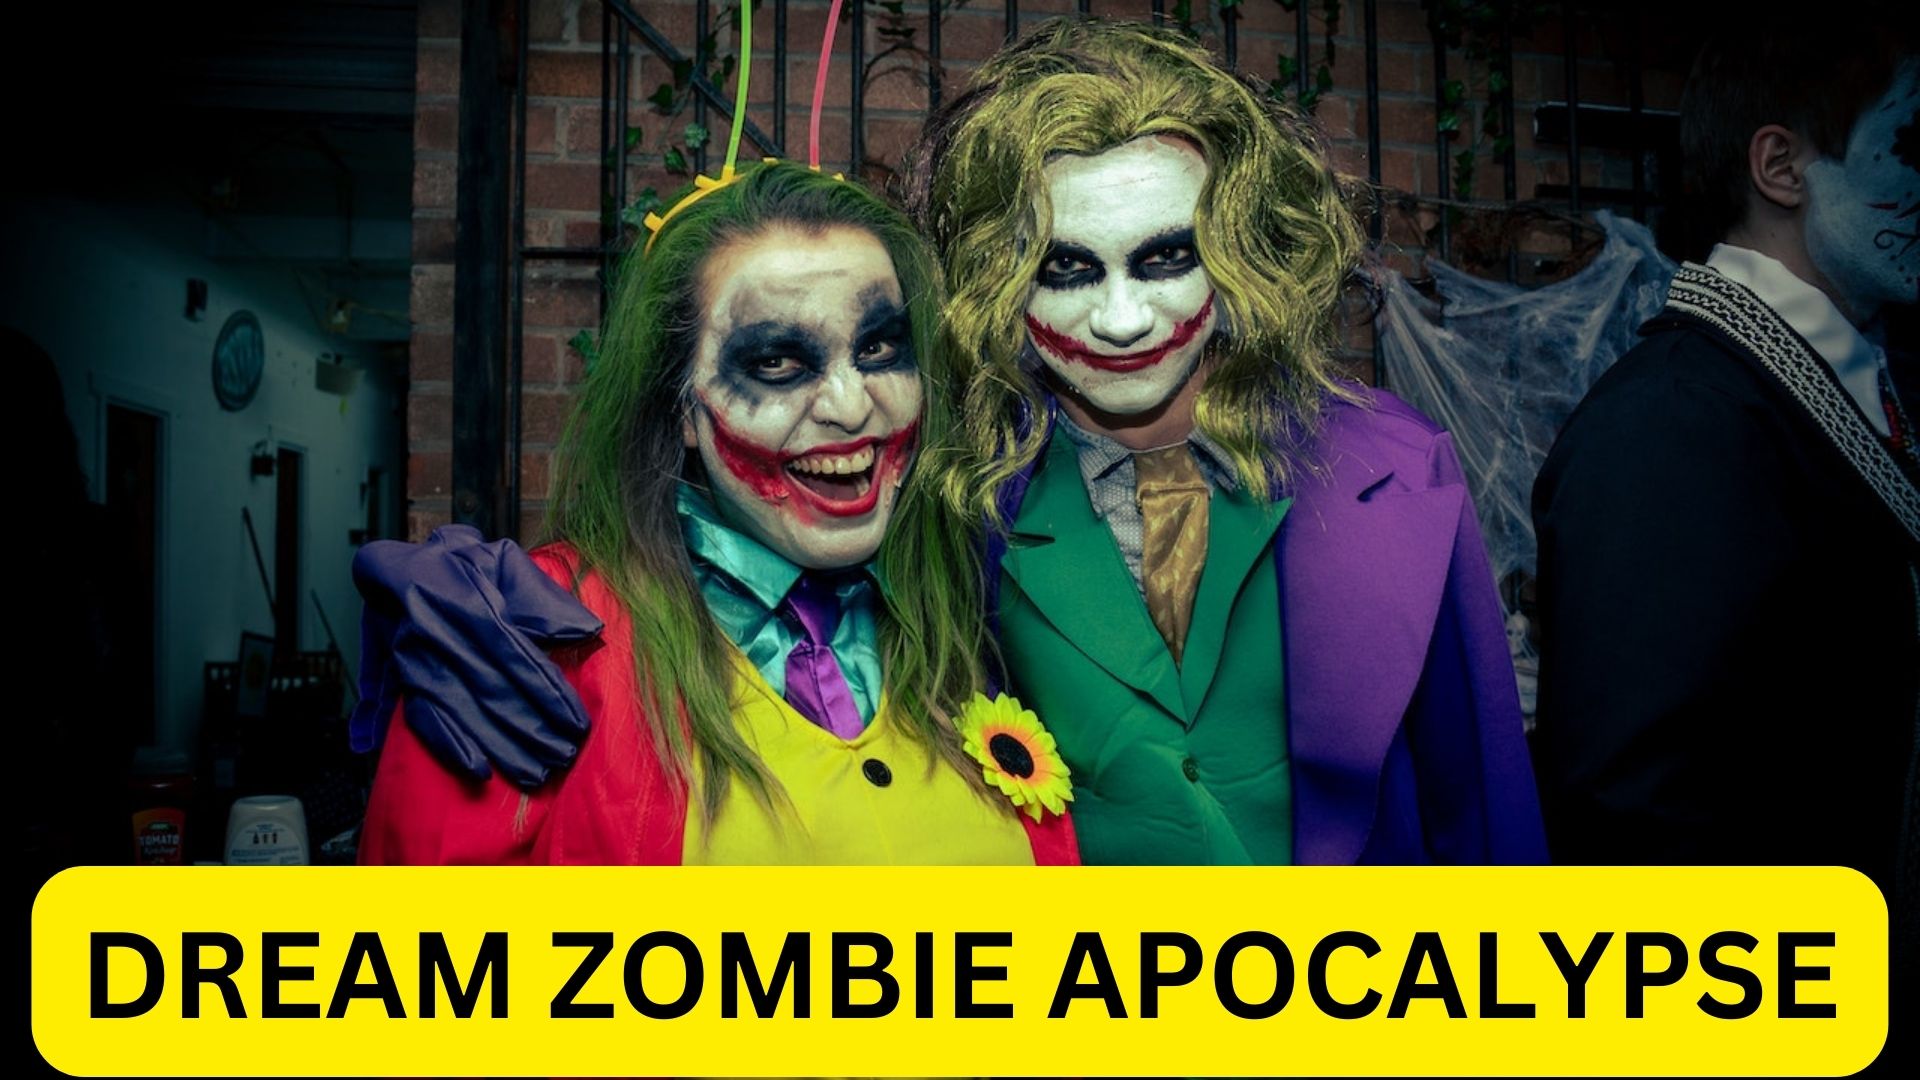 Dream Zombie Apocalypse - It Represents Fear And Bad Things